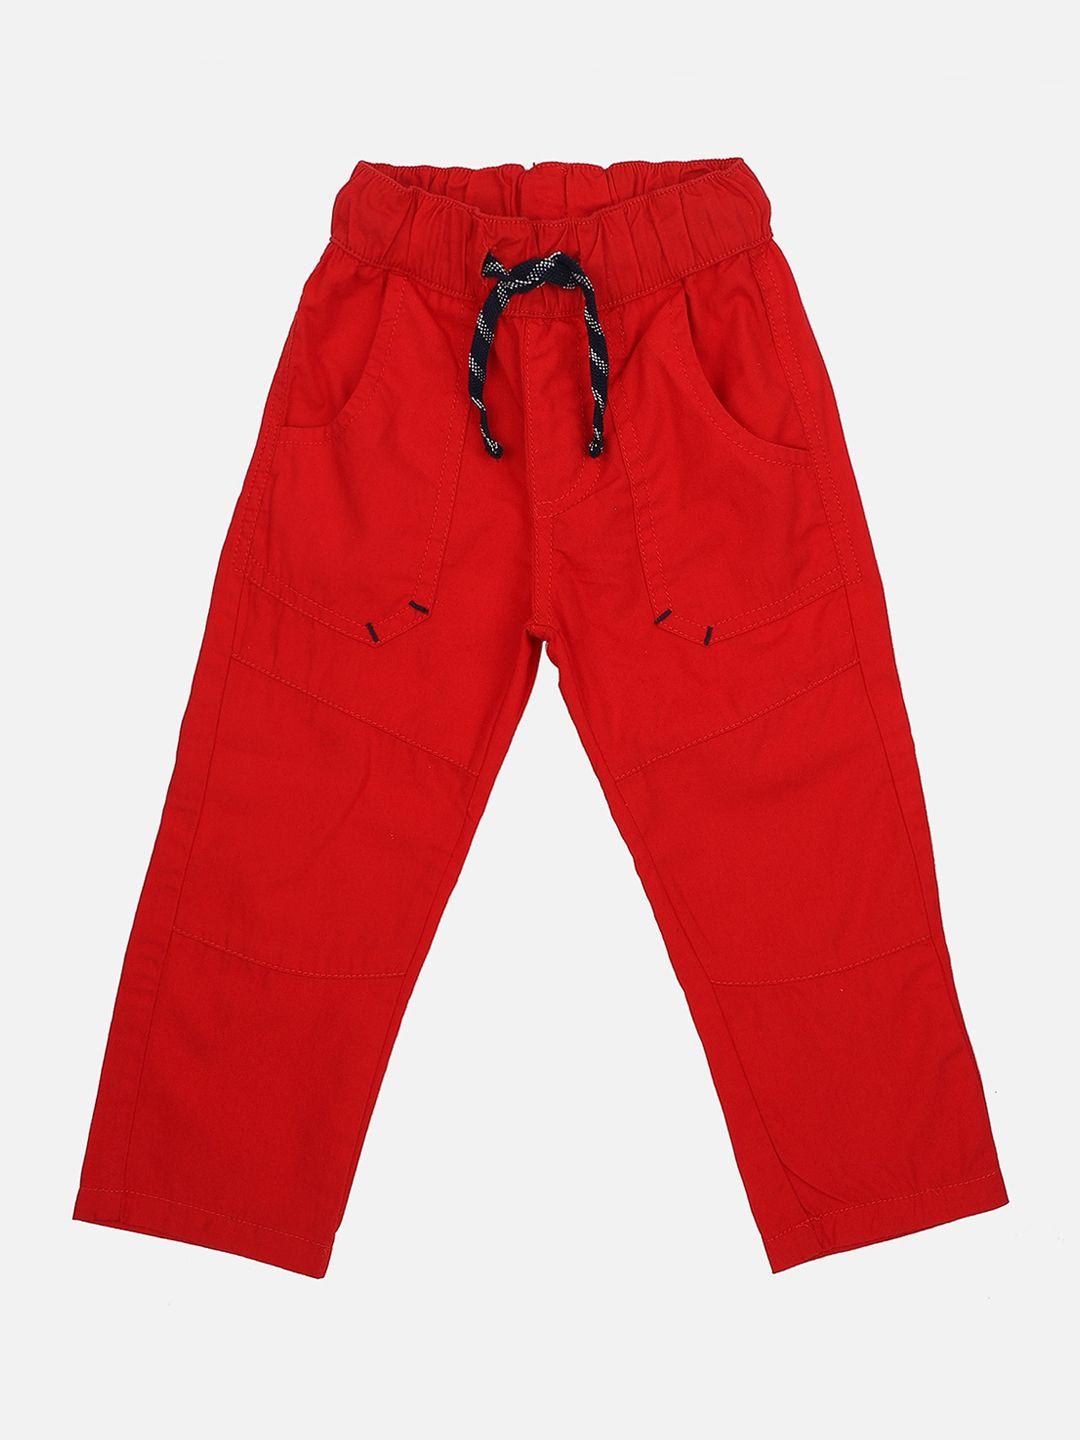 bodycare-kids-boys-red-cotton-trousers